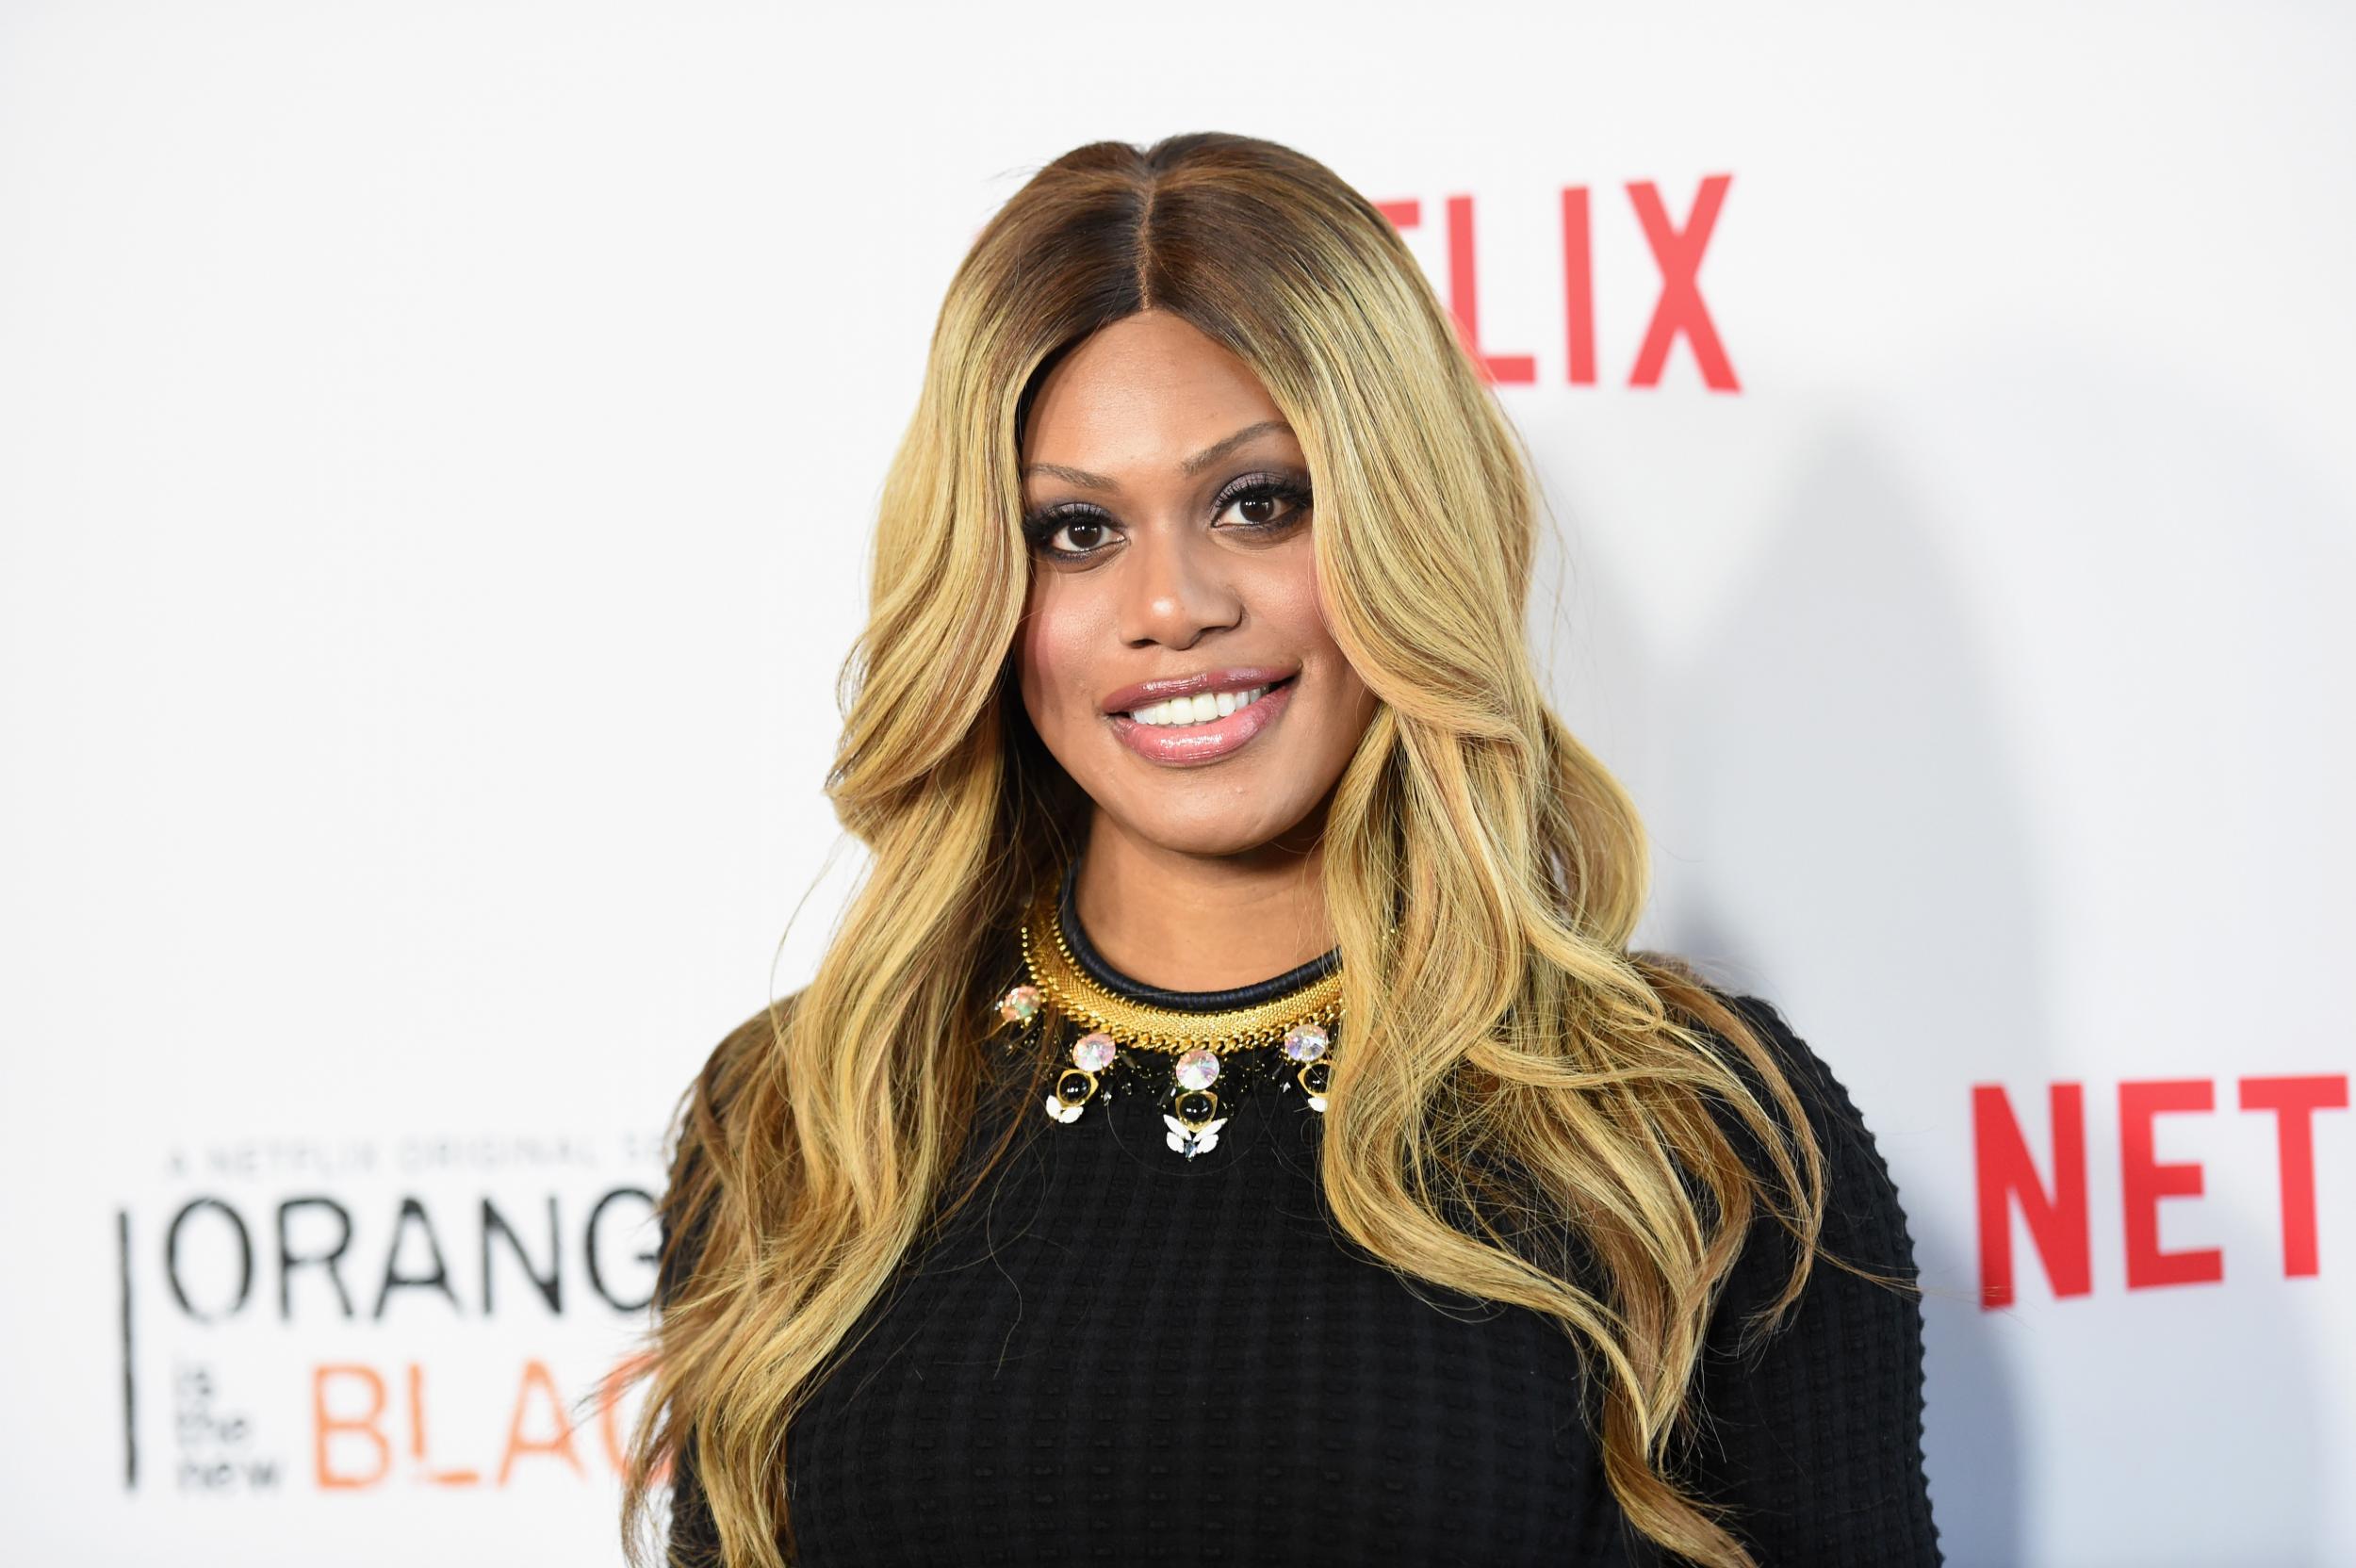 Laverne Cox referred to deadnaming as 'the ultimate insult'